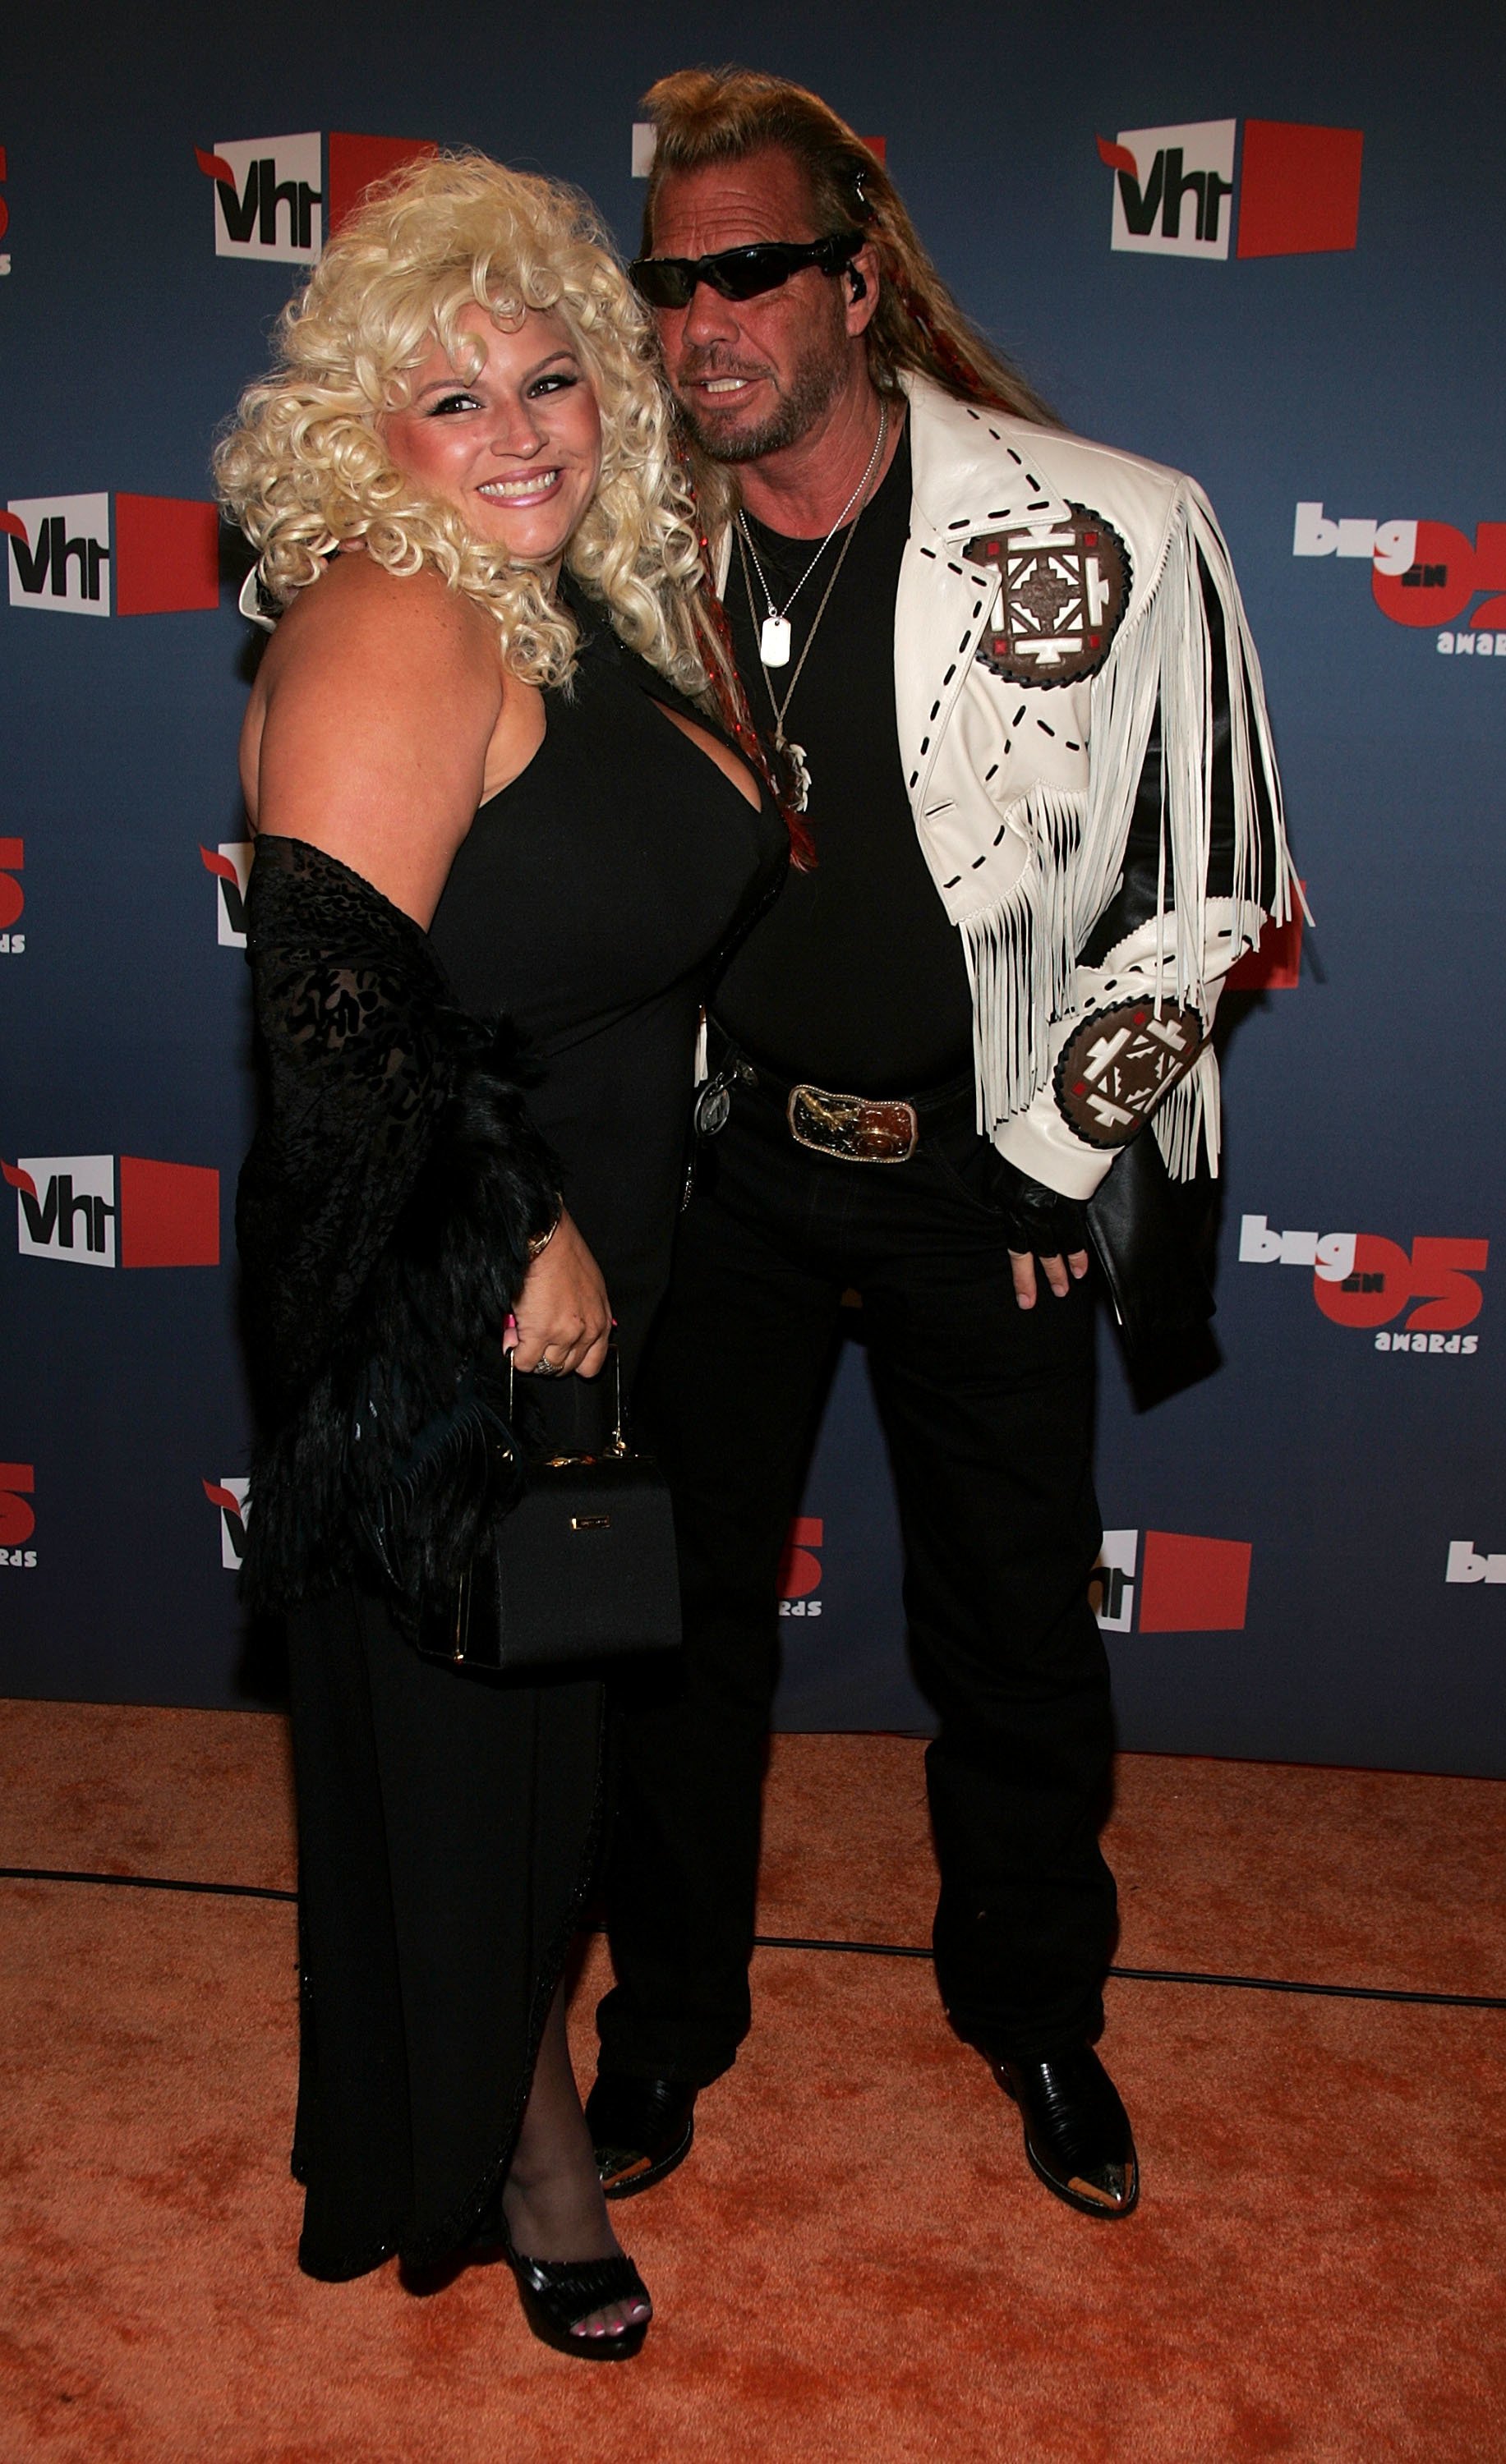 : Bounty Hunter Duane "Dog" Chapman (R) and Beth Chapman arrive at the VH1 Big In '05 Awards held at Stage 15 | Getty Images